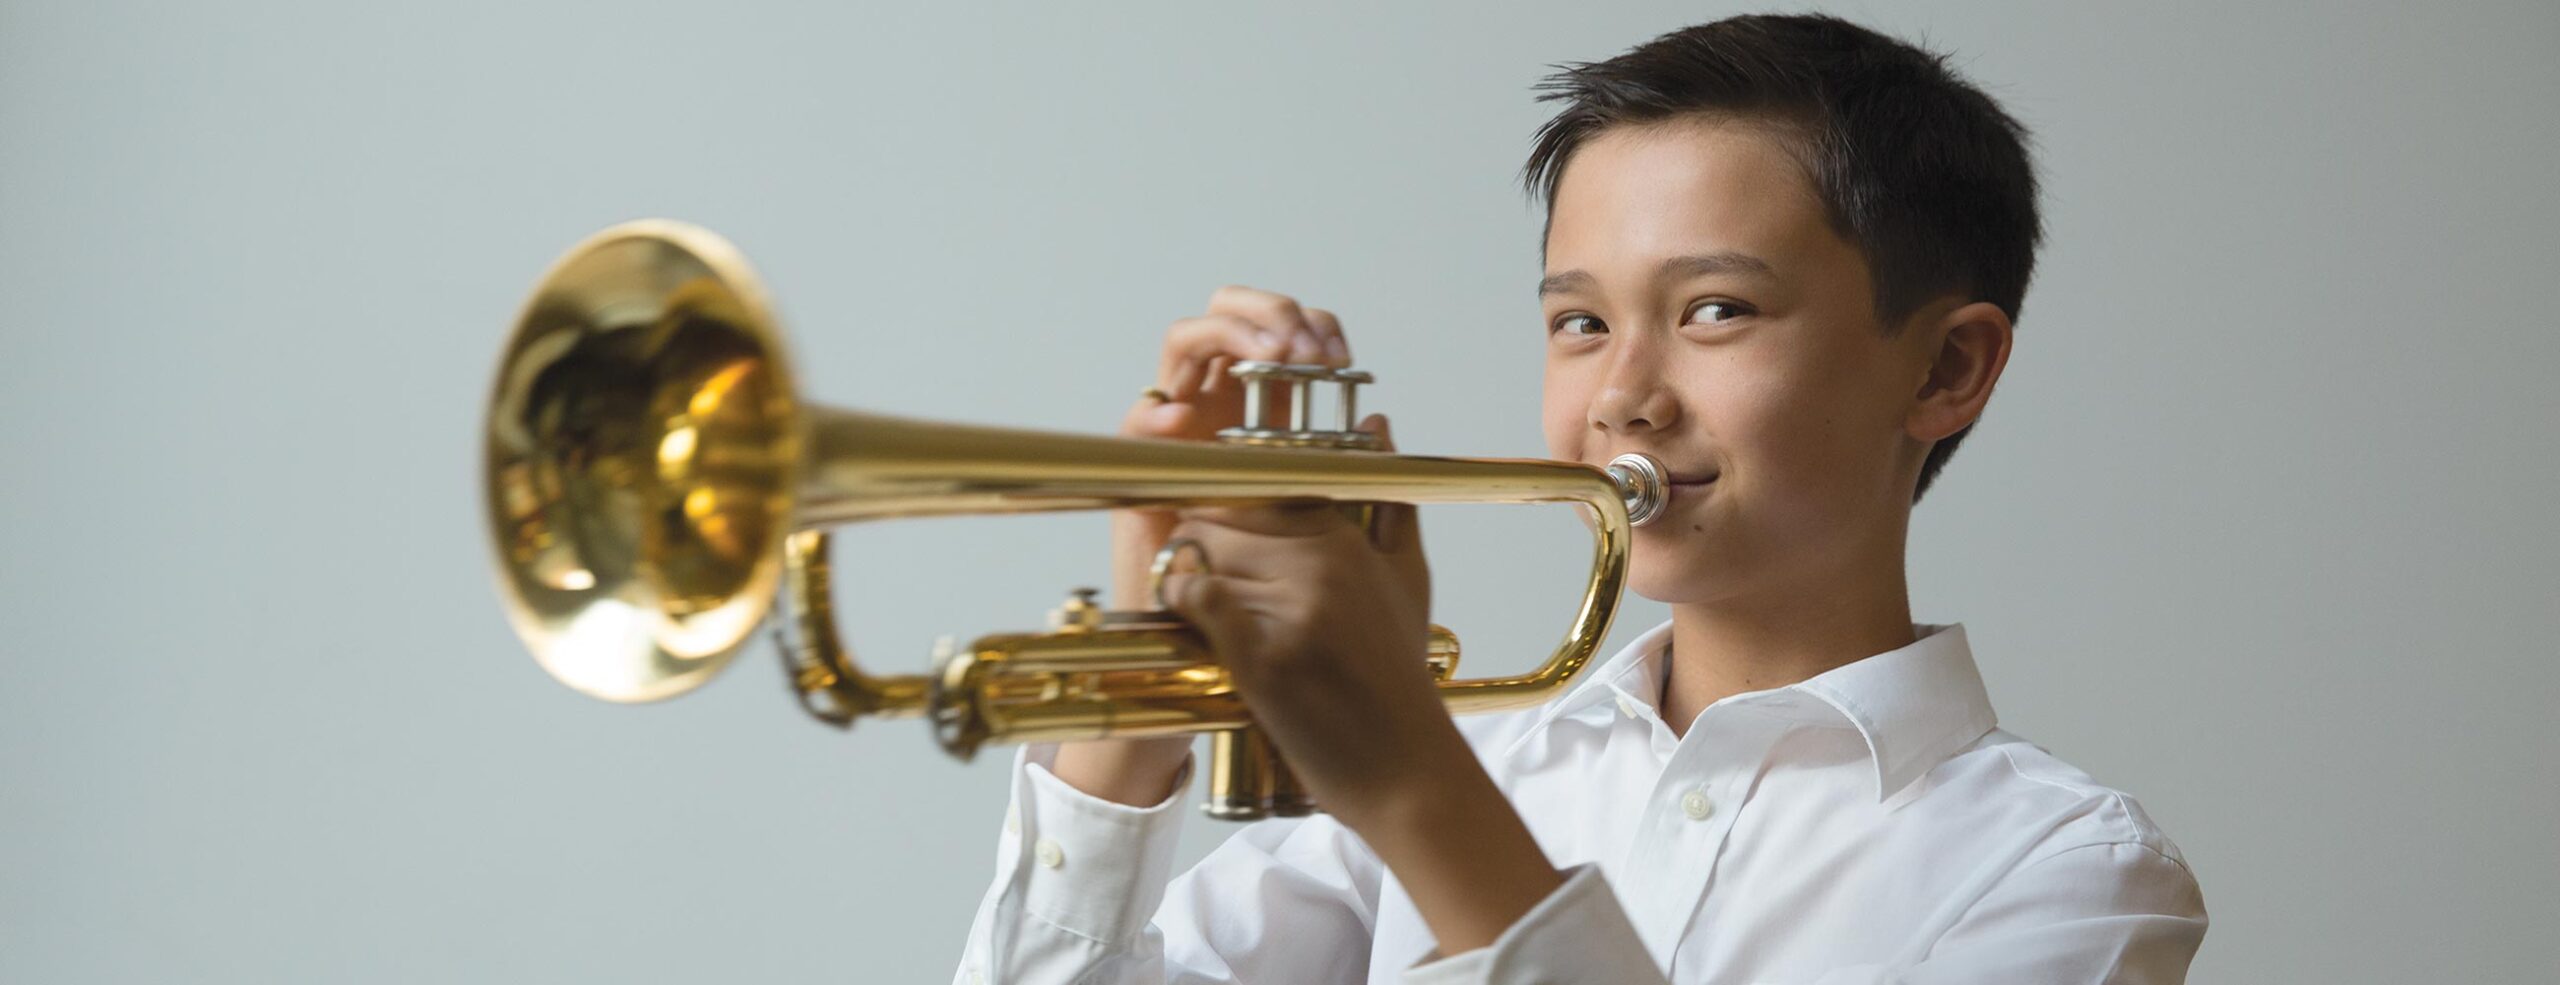 Trumpet student playing